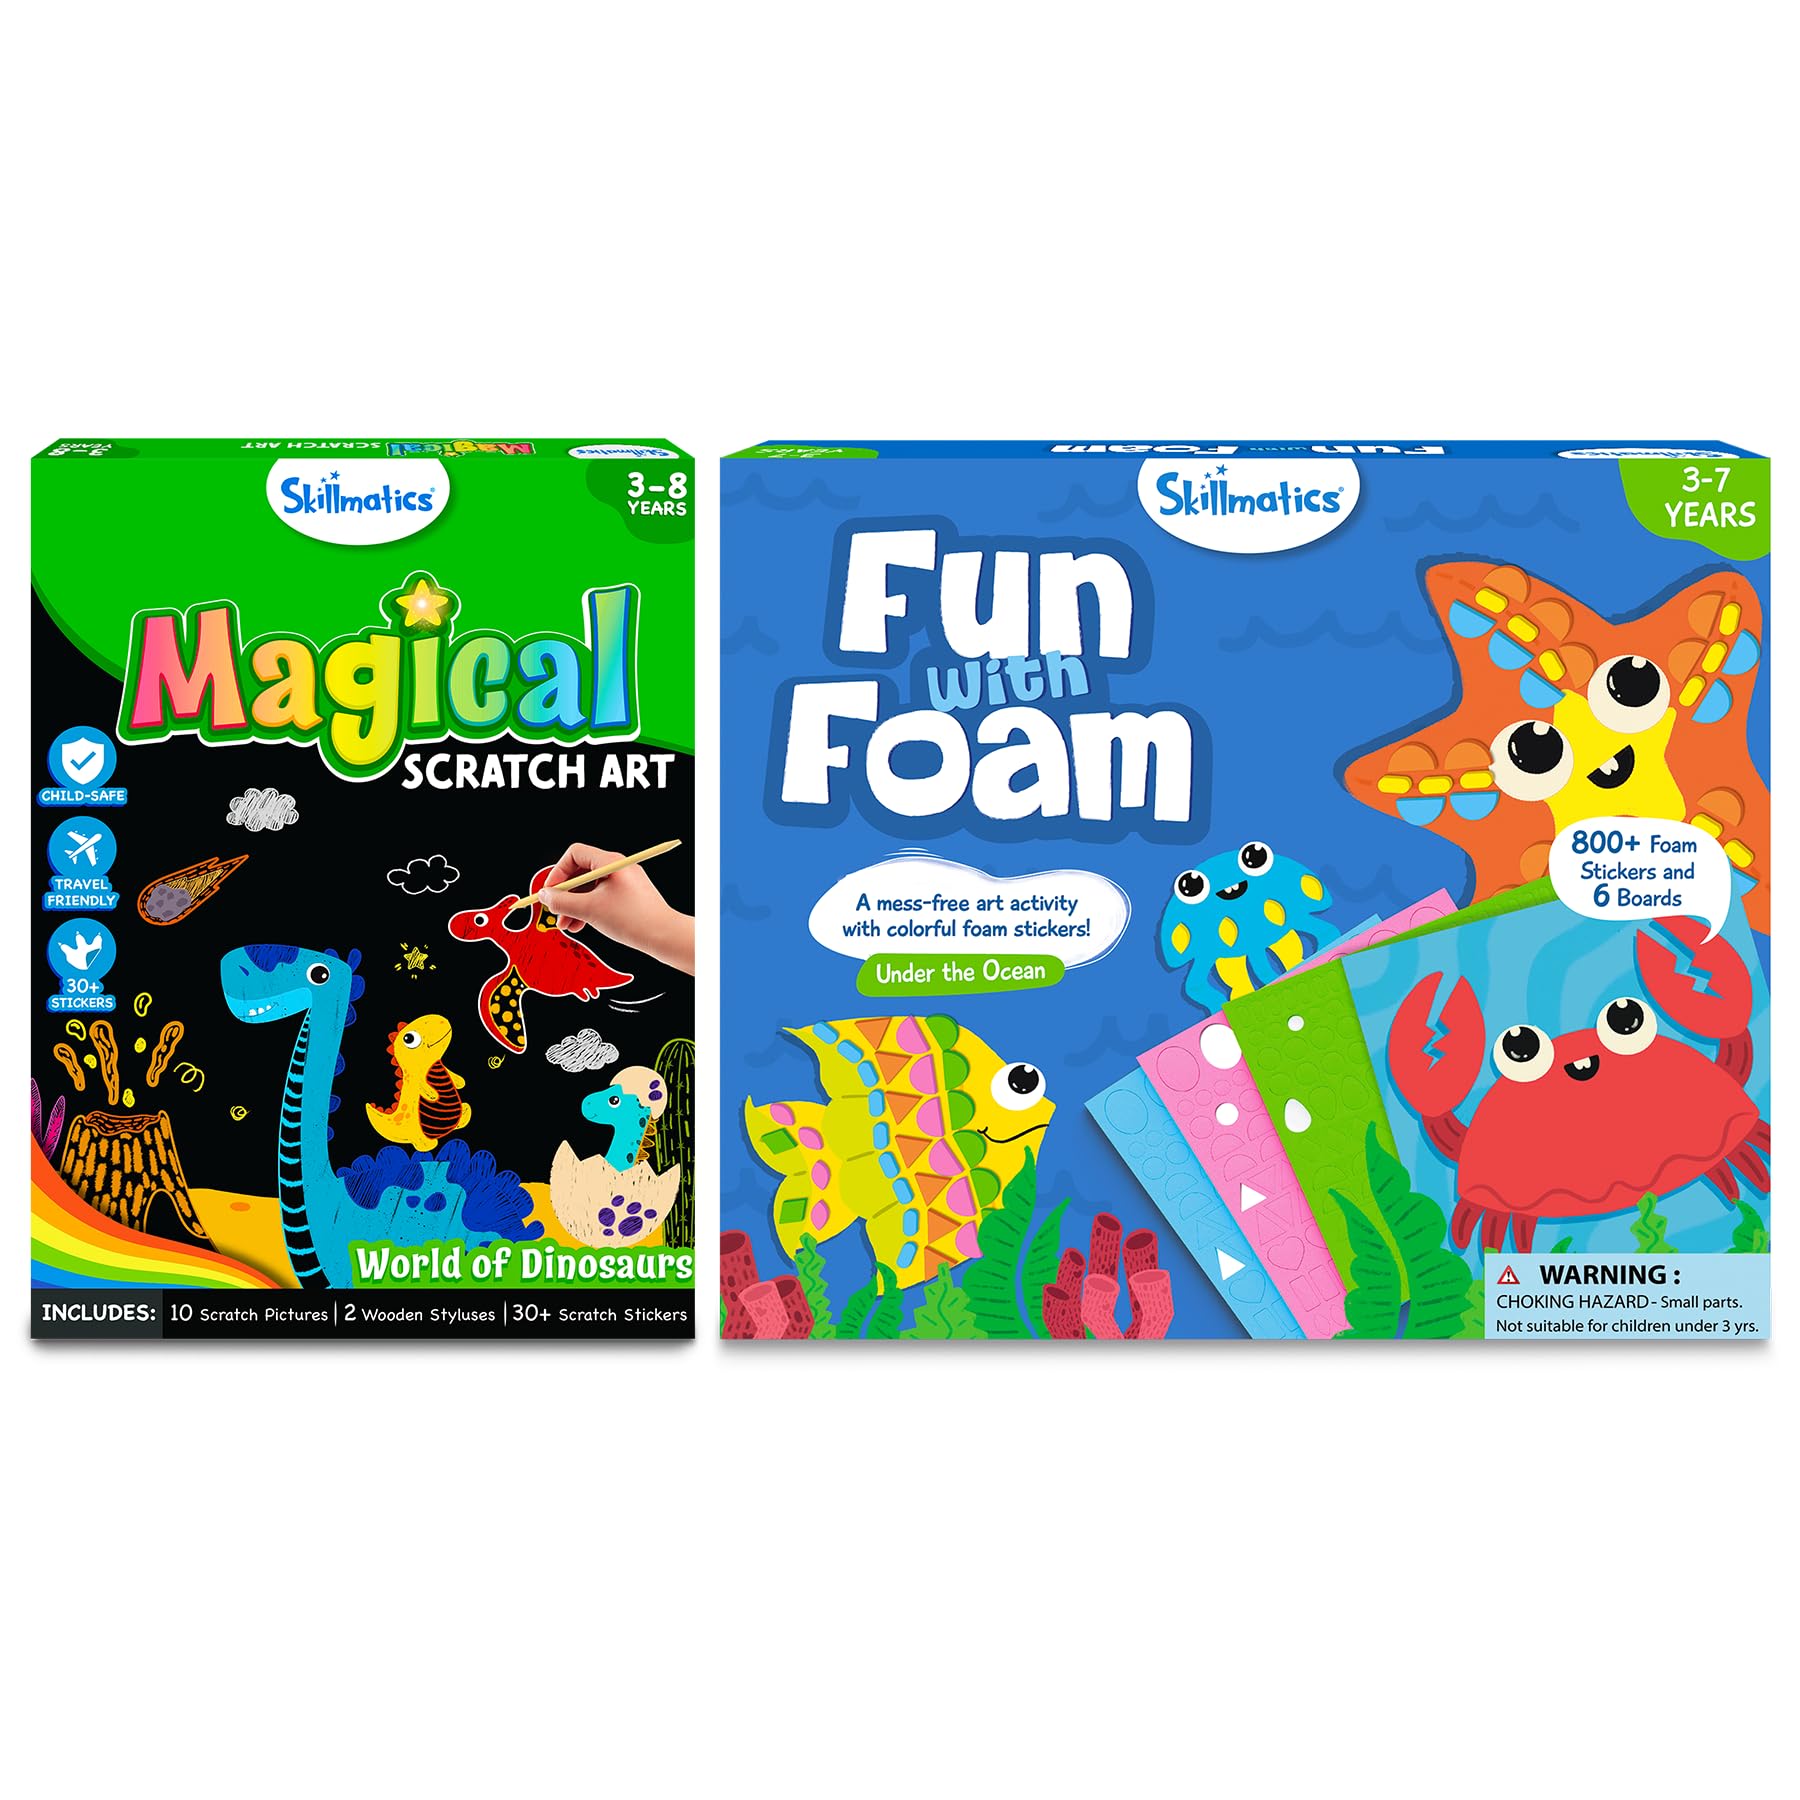 Skillmatics Magical Scratch Art Book Dinosaurs Theme & Fun with Foam with Underwater Animals Theme Bundle, Art & Craft Kits, DIY Activities for Kids